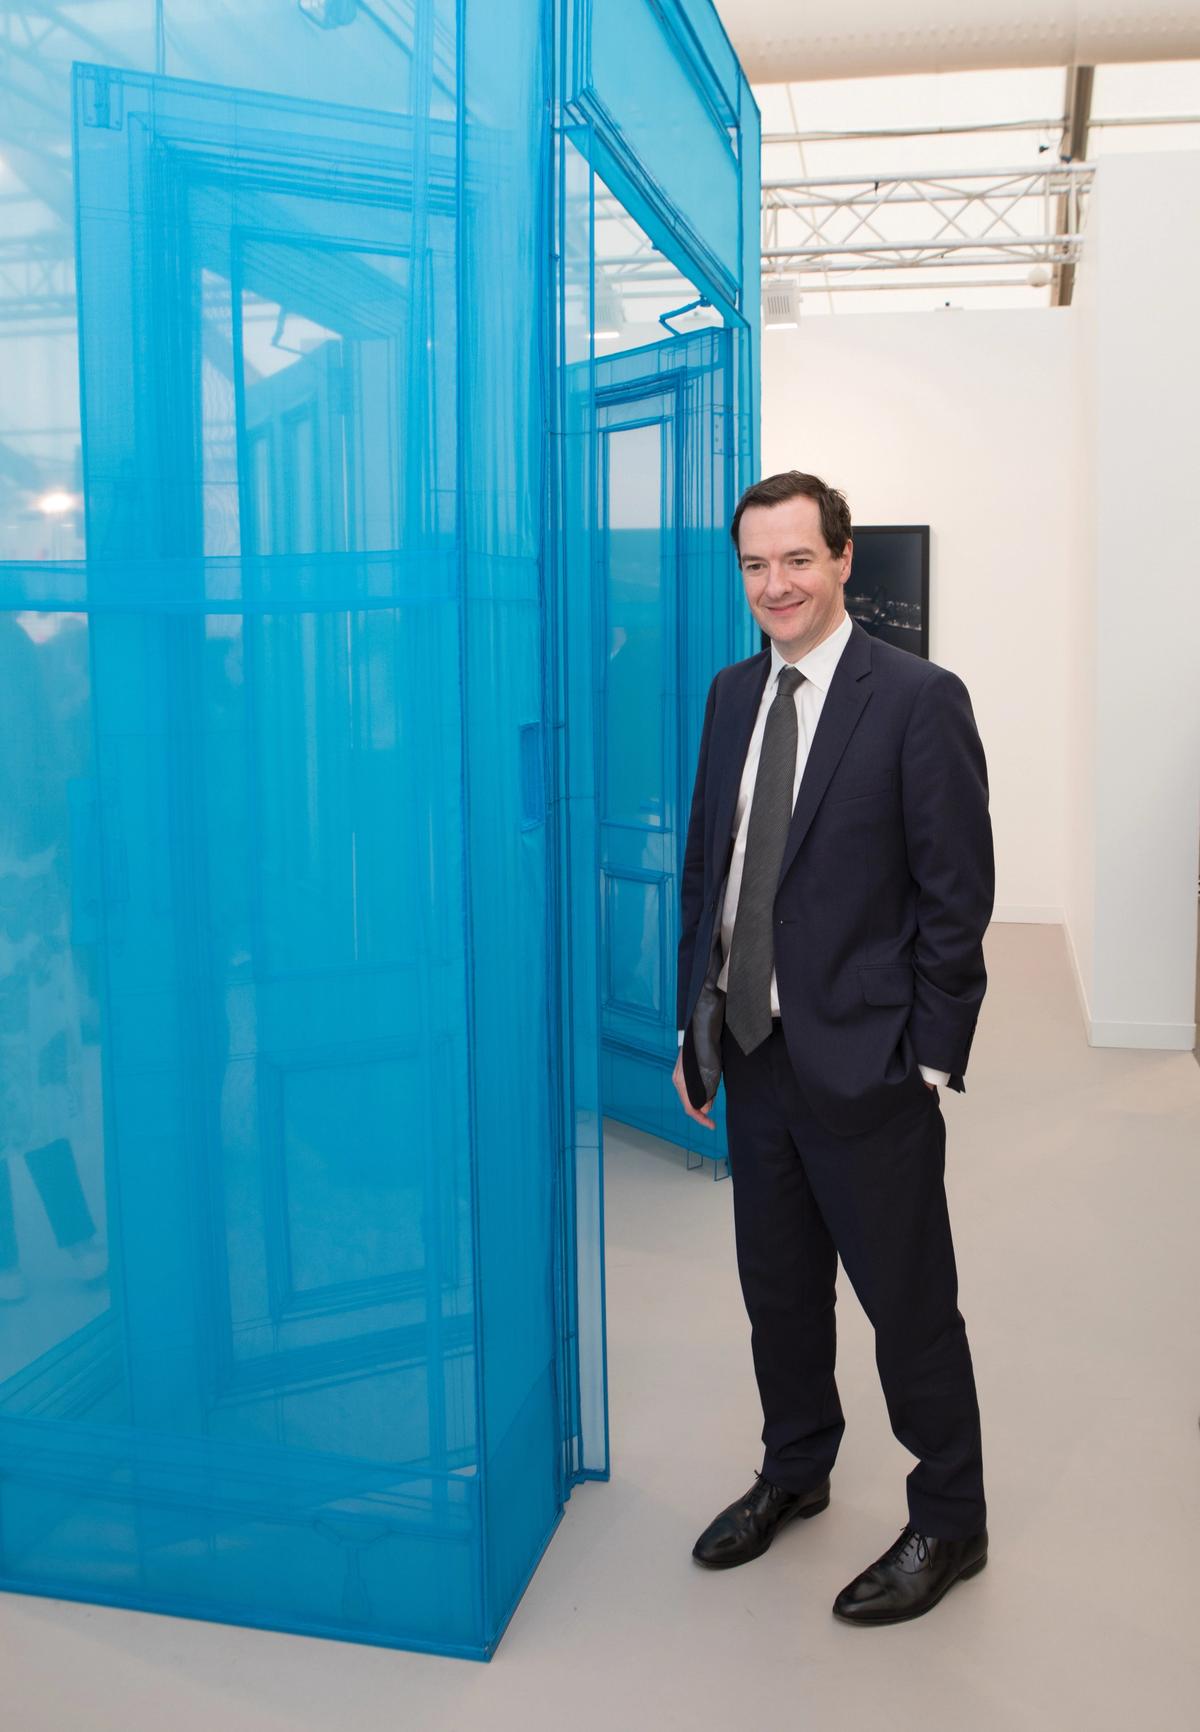 George Osborne, formerly Chancellor of the Exchequer, at Frieze London in 2017 Photo: © David Owens